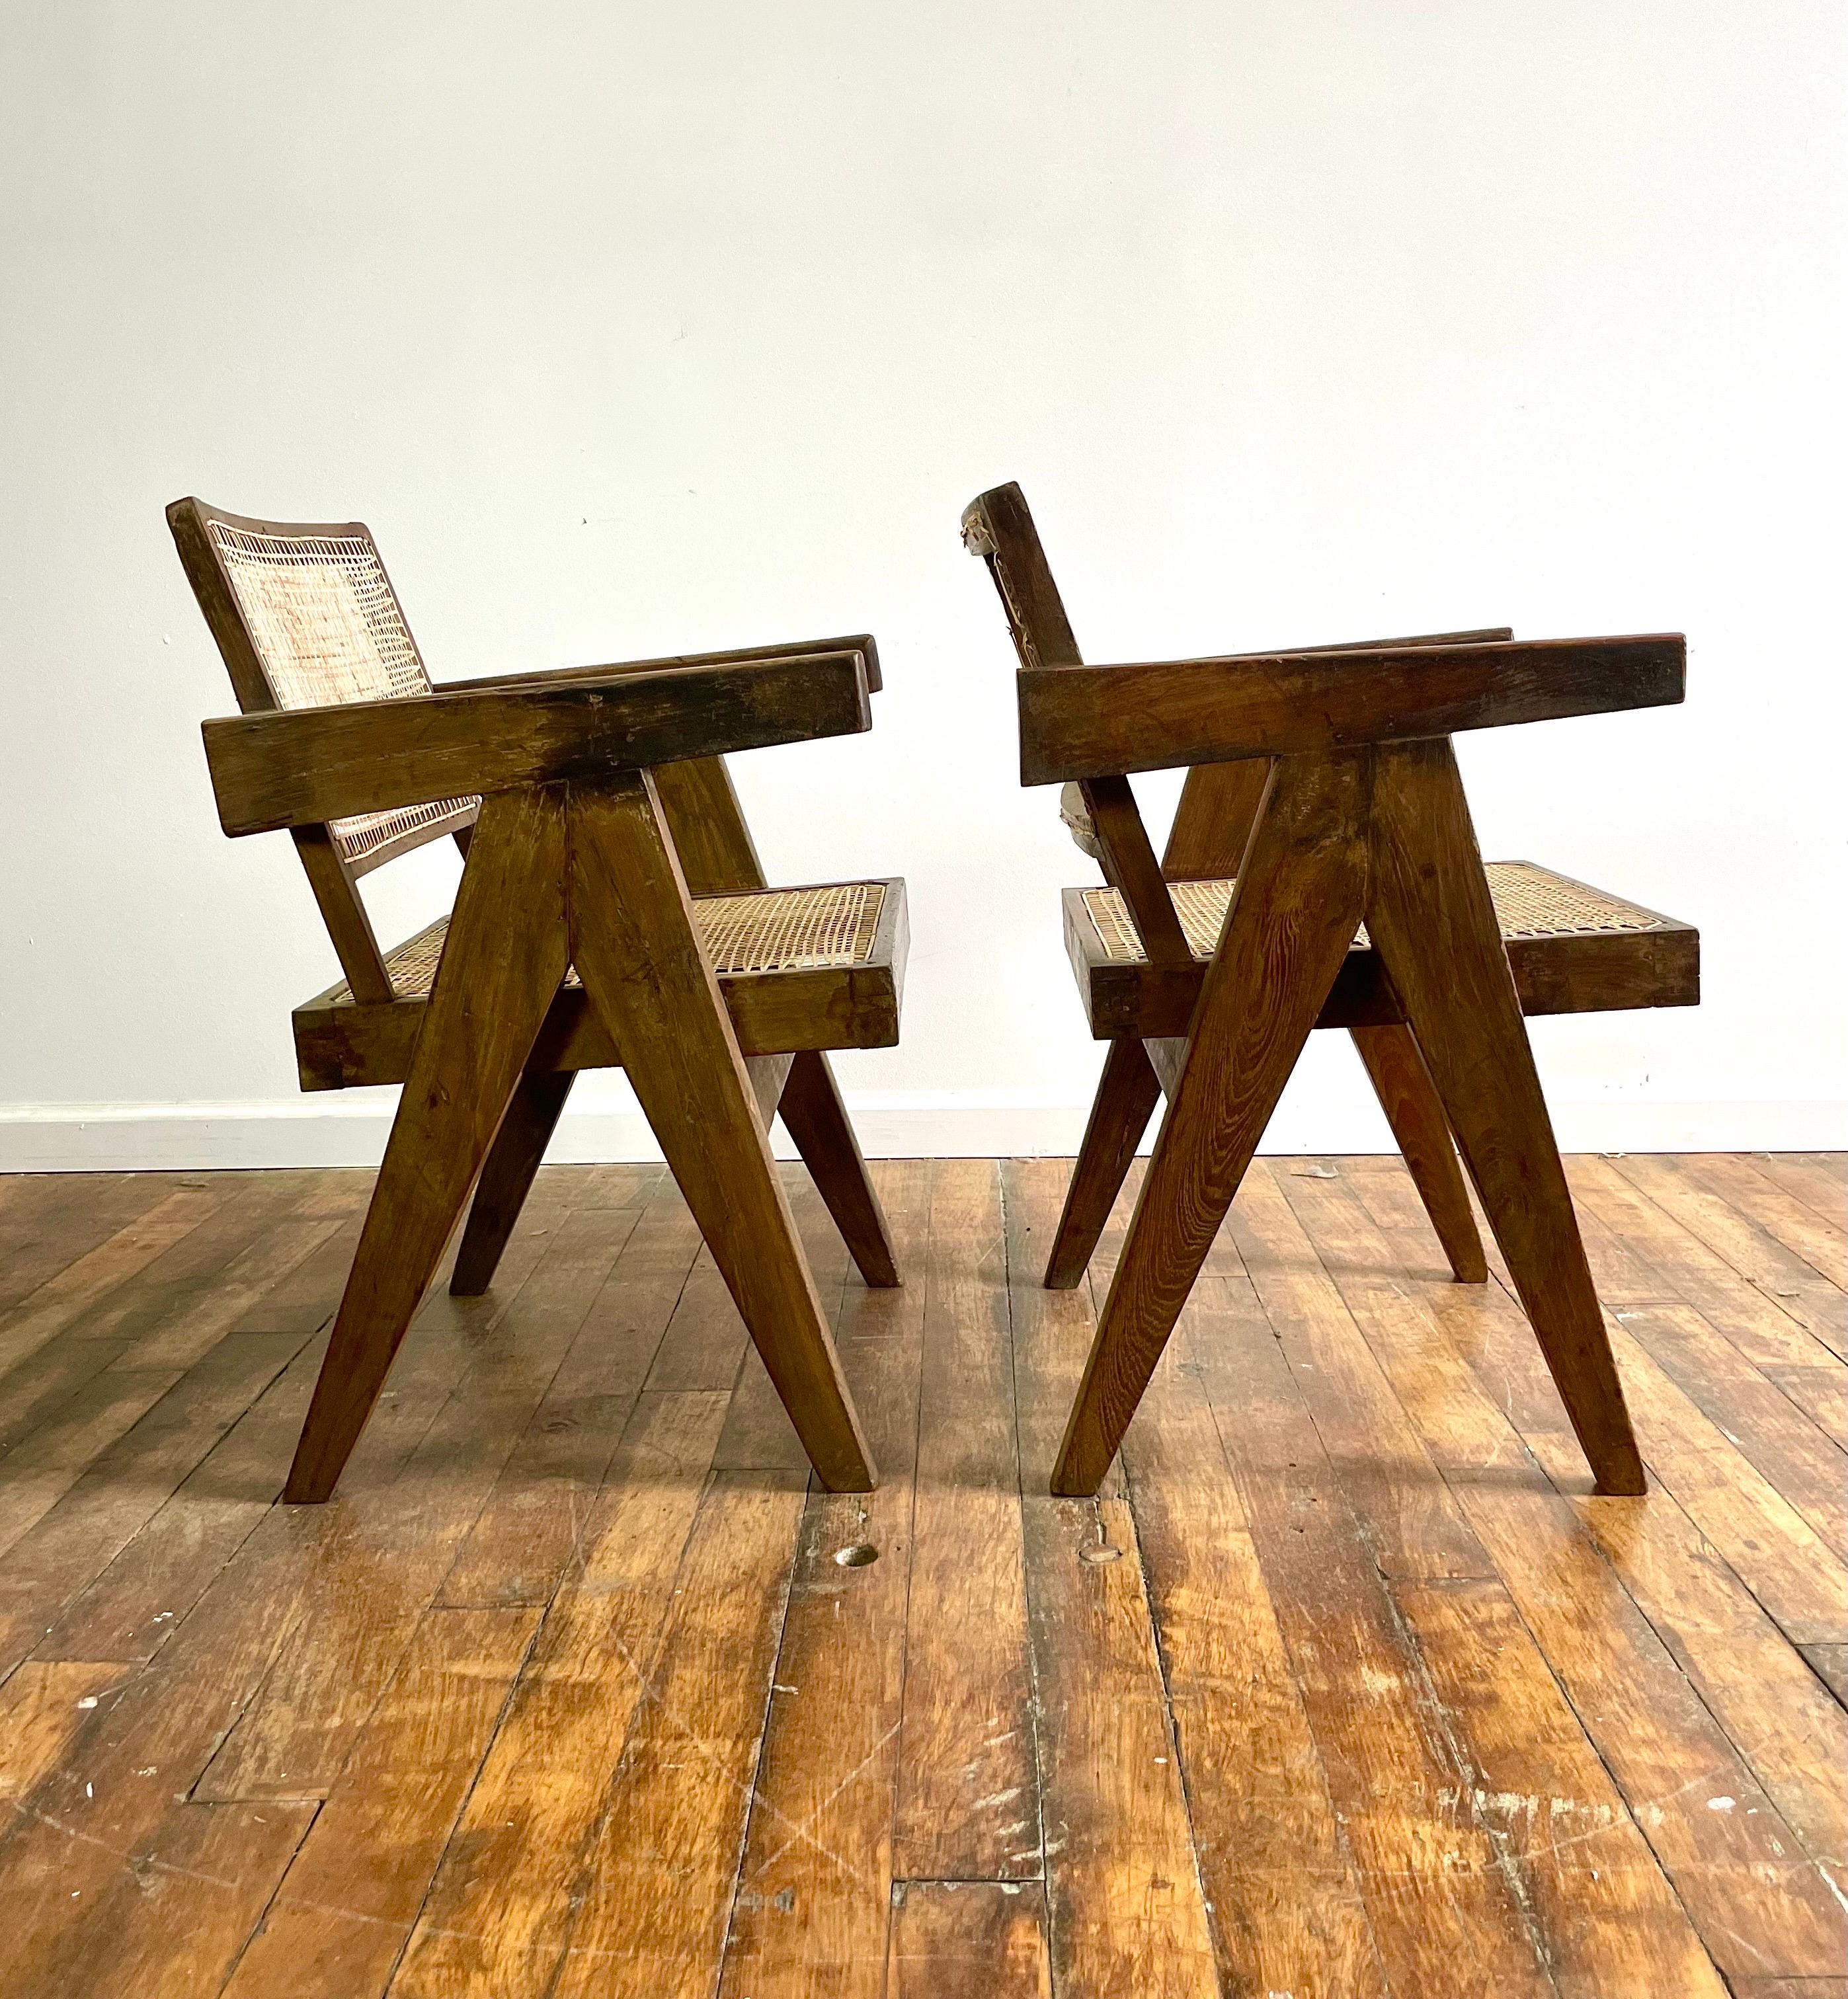 A breathtaking pair of very early Pierre Jeanneret Office Chairs. With so many Jeanneret chairs on the market why are these exceptional? 

First: the thickness of the wood is perfect and in accordance with some of the best examples ever sold.